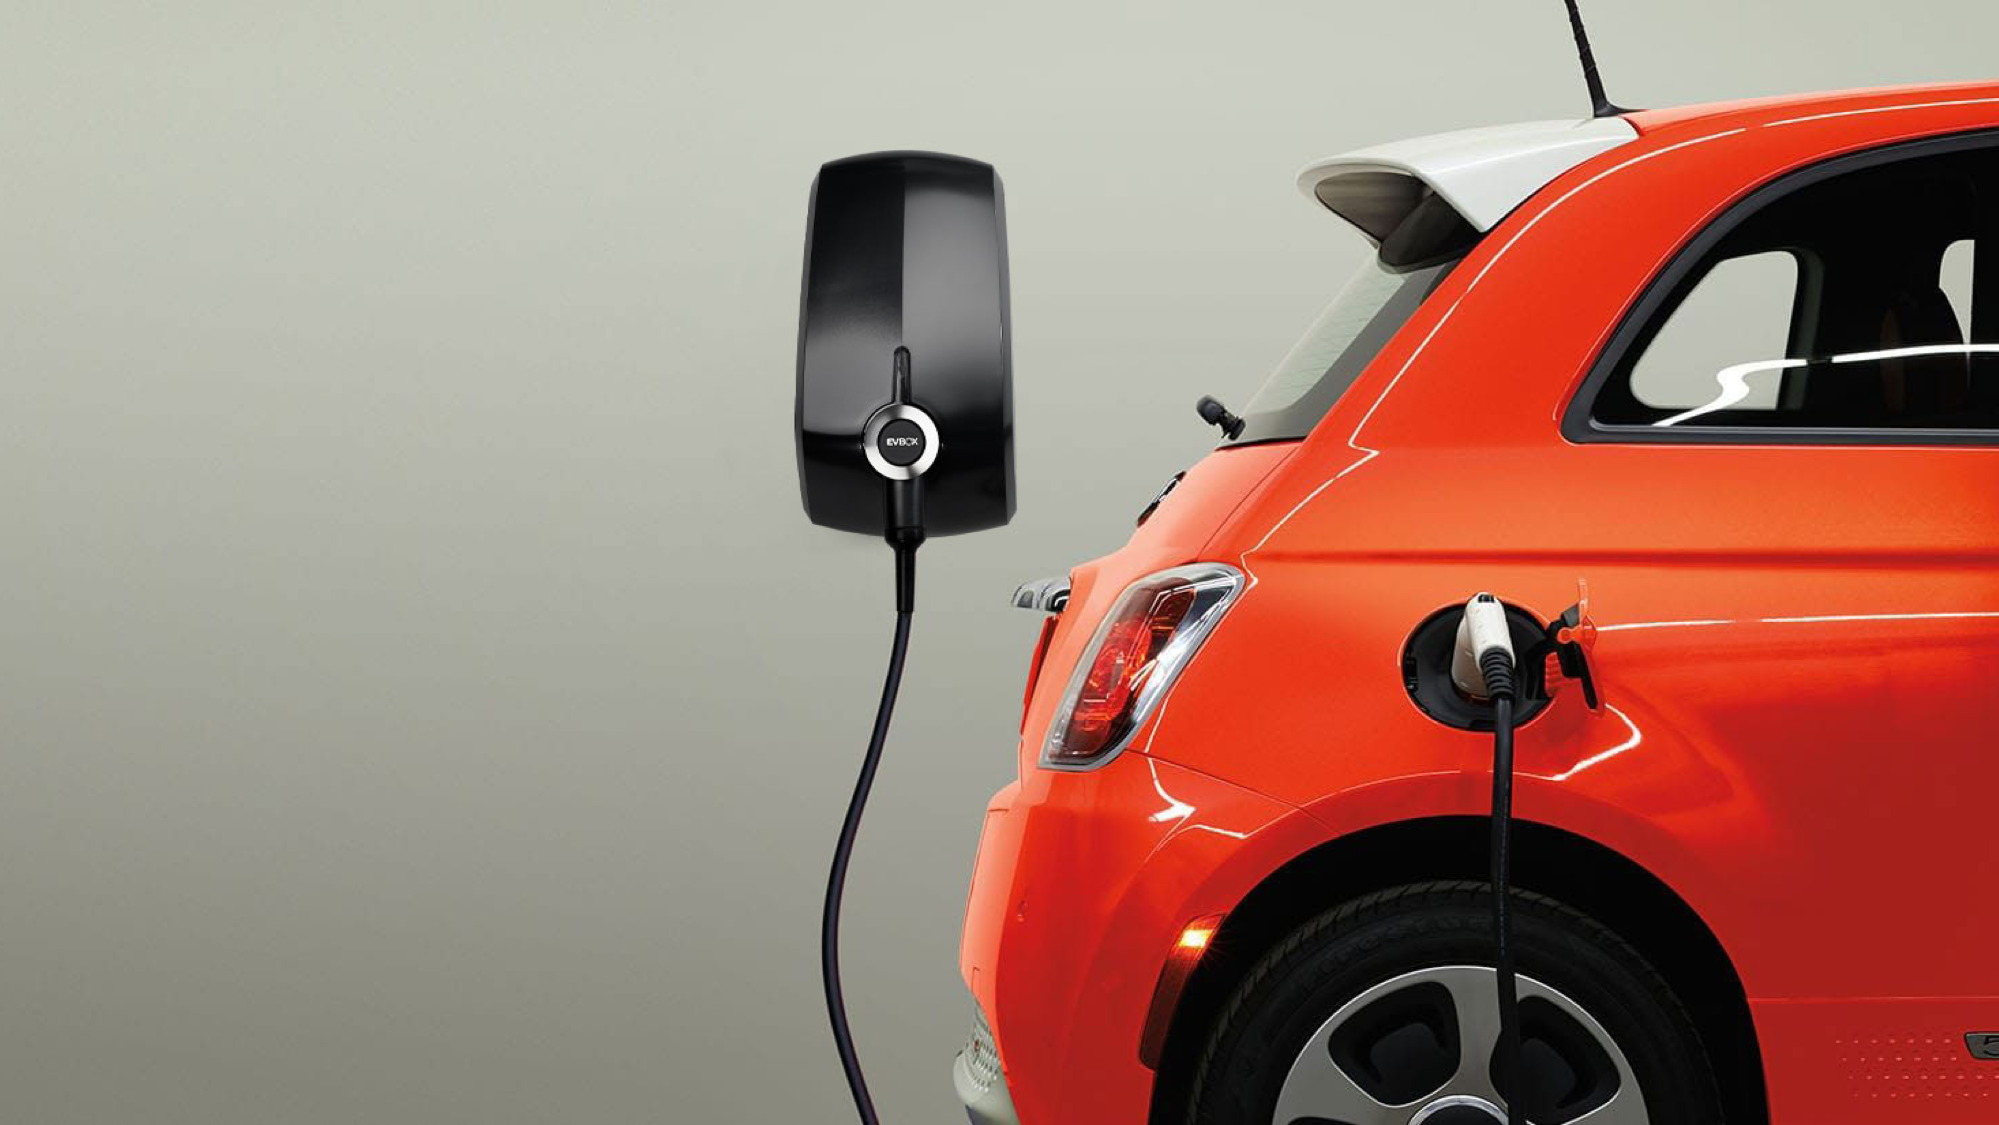 Fiat Chrysler Automobiles customers will be given the opportunity to have EVBox chargers installed at home.